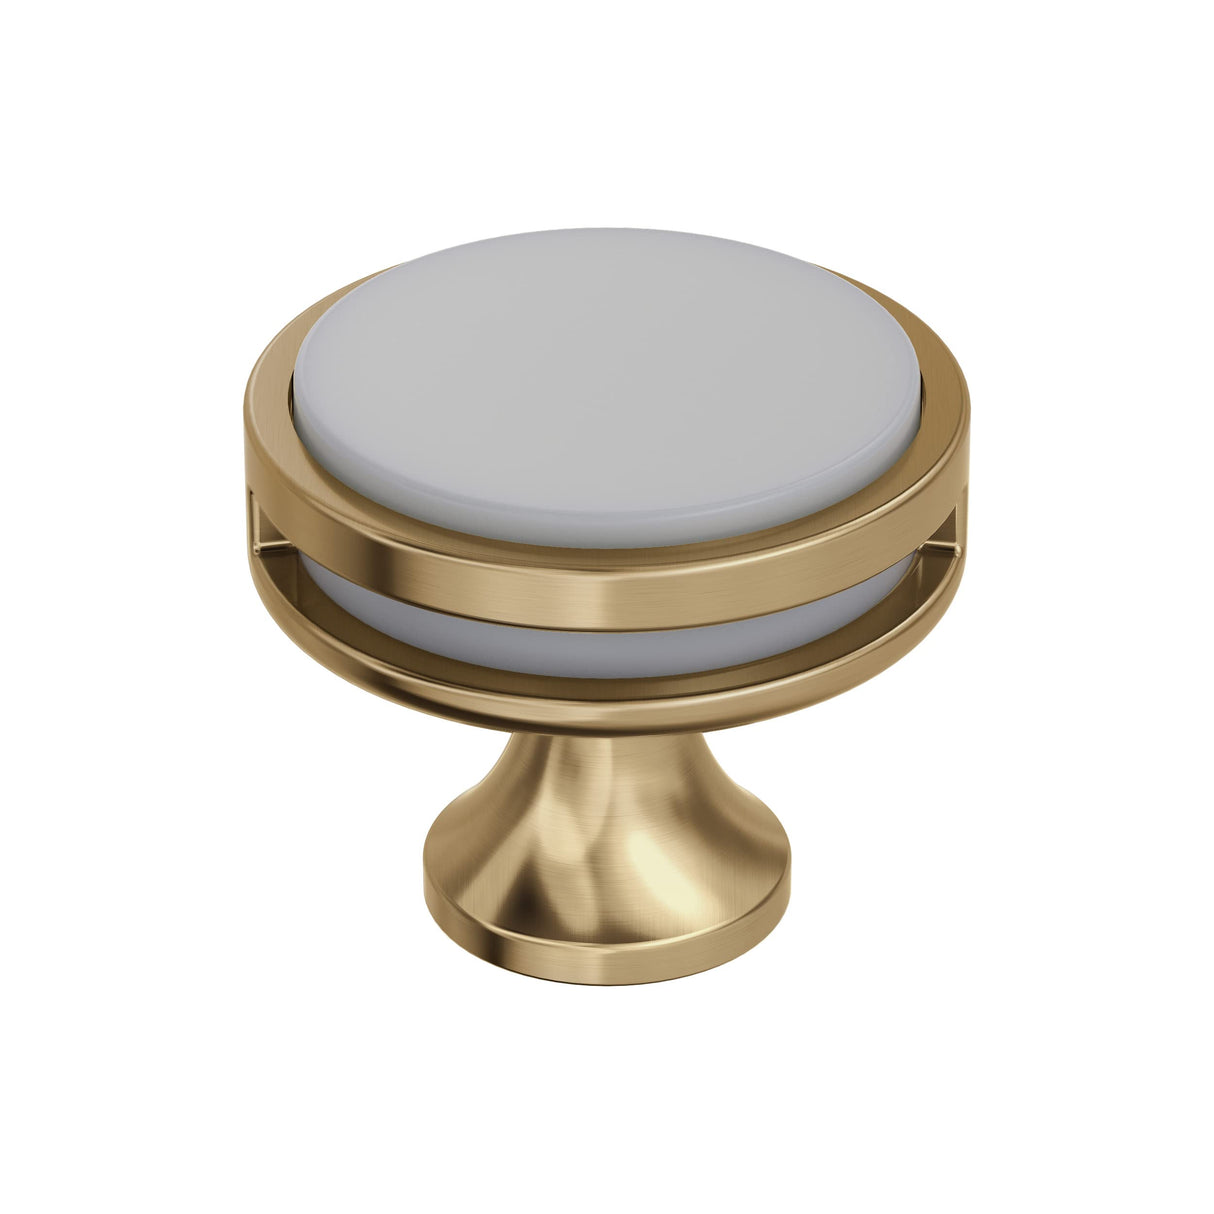 Amerock Cabinet Knob |Champagne Bronze/Frosted Acrylic 1-3/8 in (35 mm) Diameter Drawer Knob Oberon Kitchen and Bath Hardware Furniture Hardware